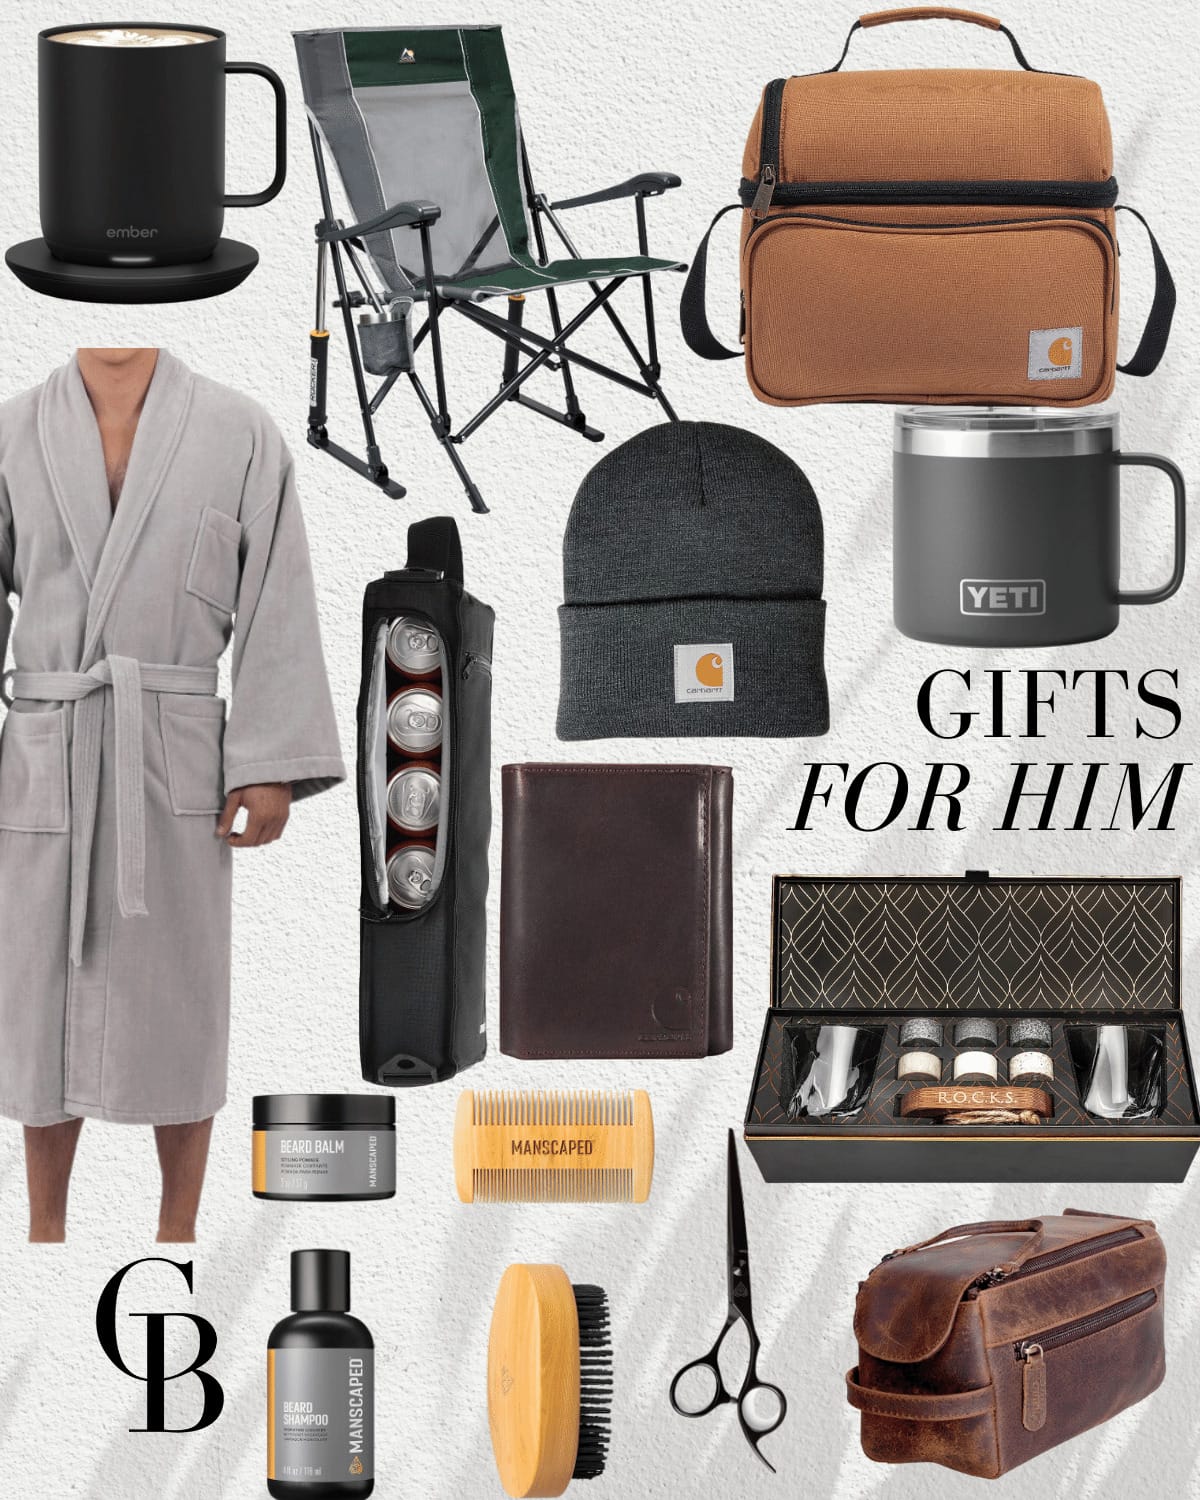 10 holiday gift guides everyone will love | #holiday #giftguide #christmas #giftideas #giftsforhim #giftsforhusband #sports #lounge #travel #camping #coffee